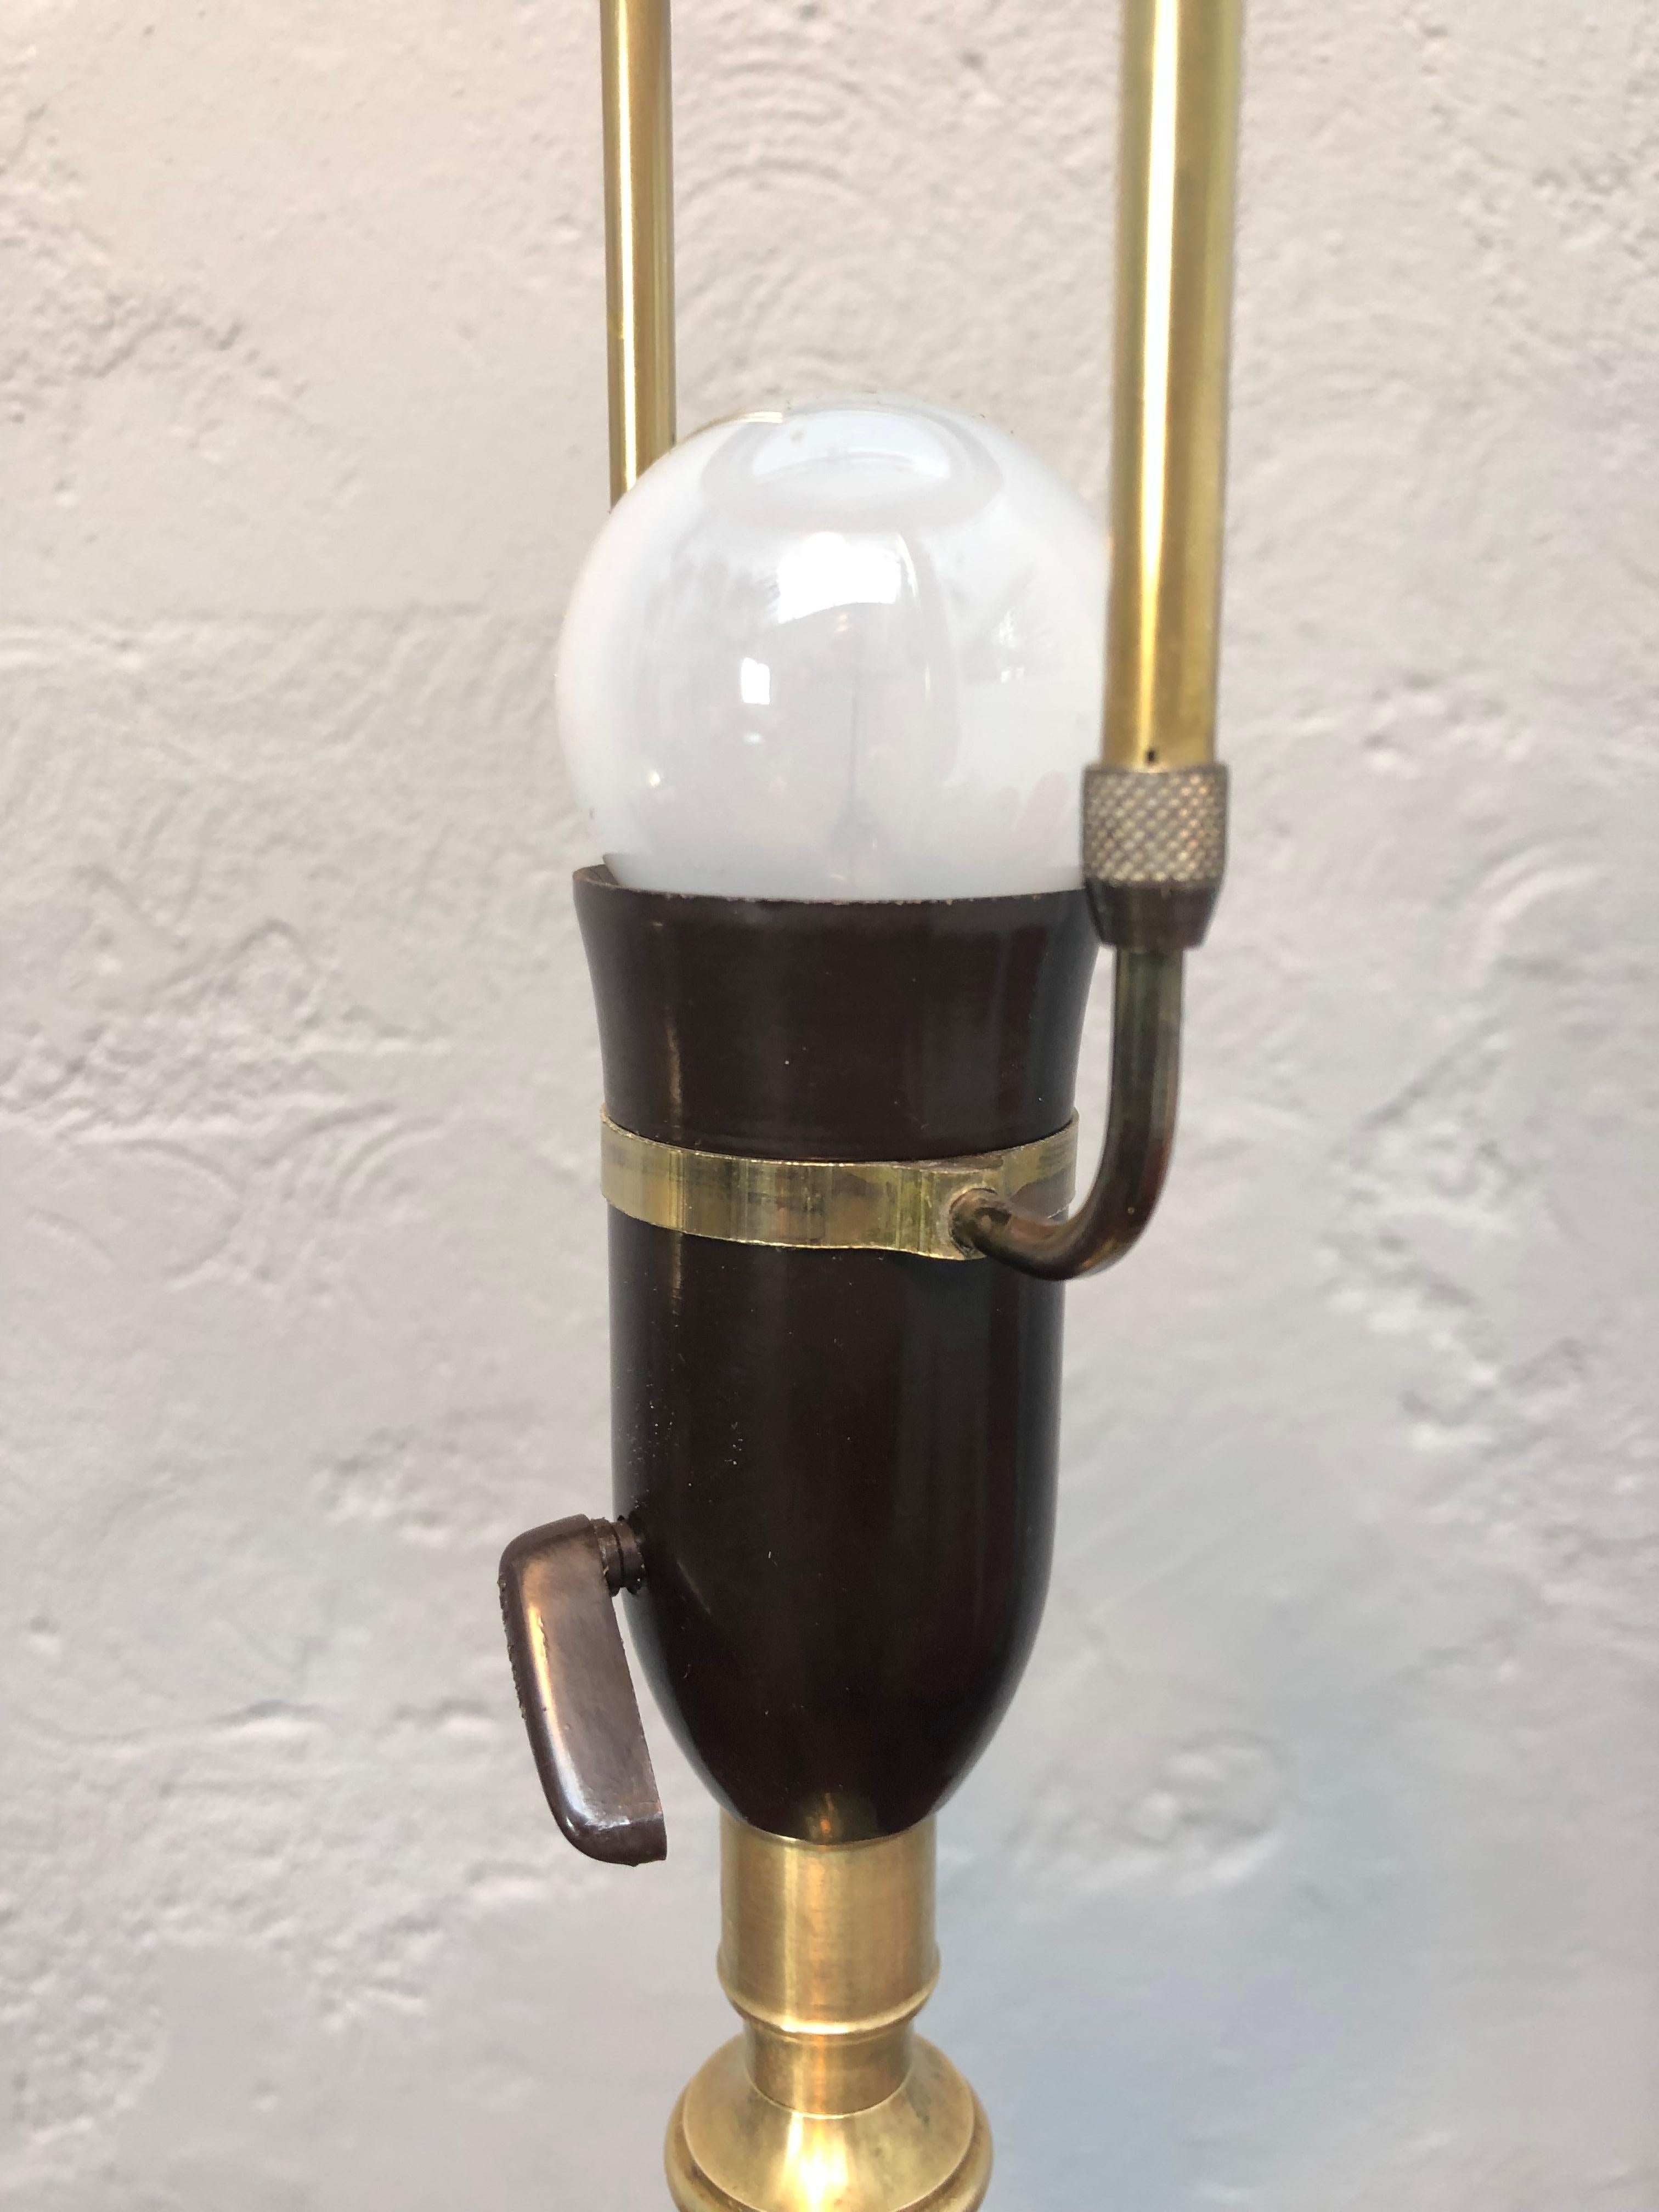 Vintage Pair of Brass Table Lamps by Esben Klint for Le Klint from the 1950s For Sale 3